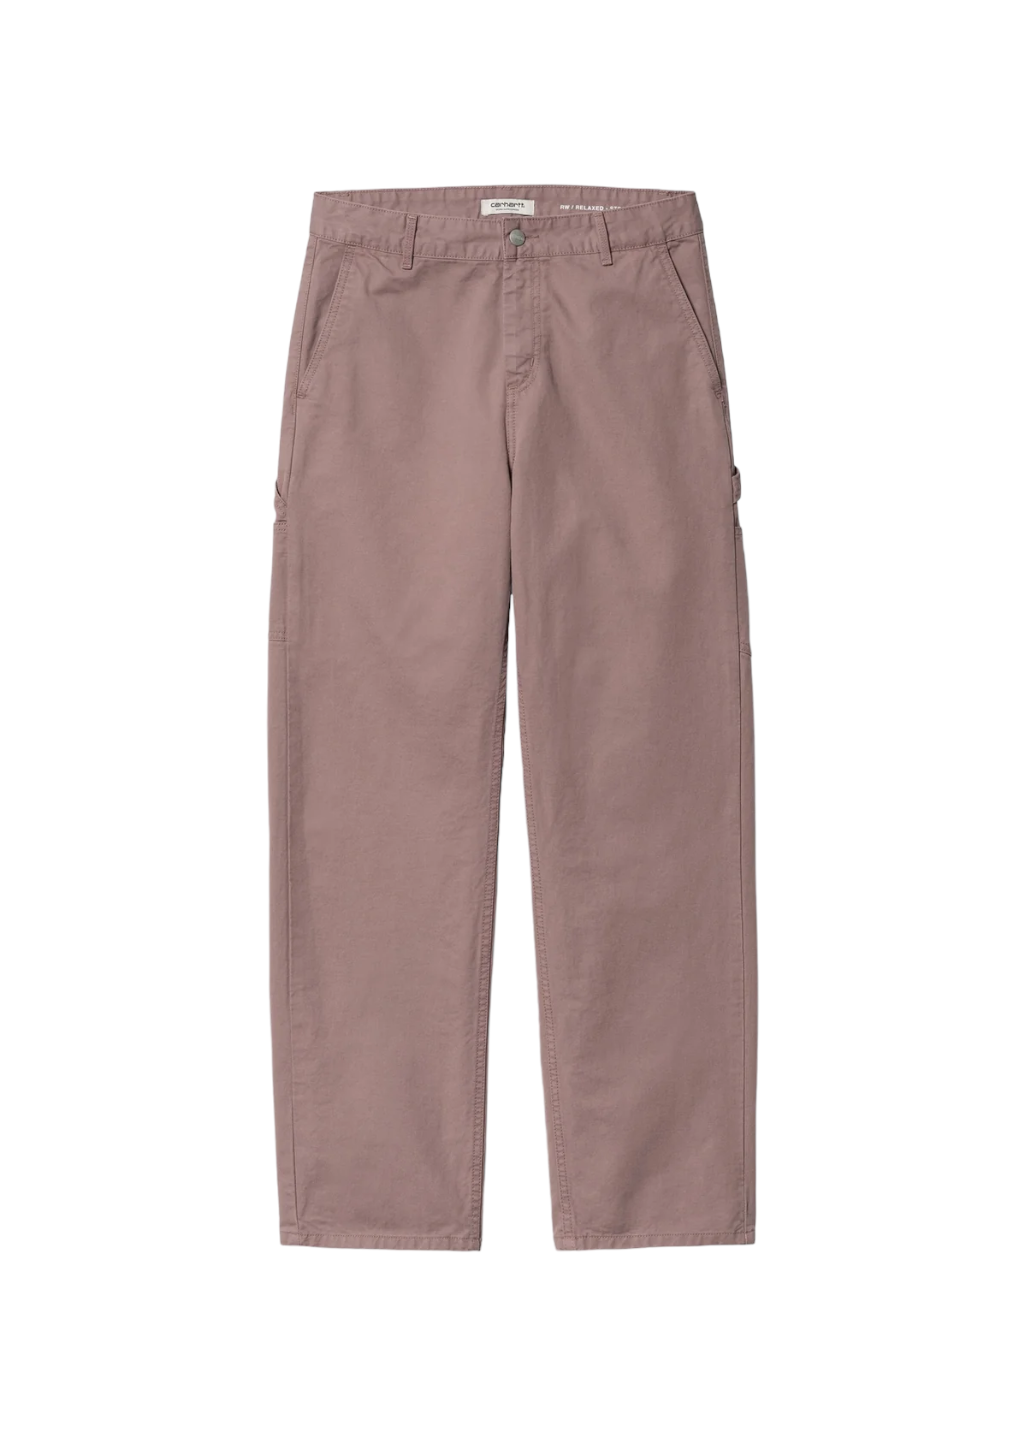 carhartt WIP Ws pierce pant (not the straight version) YOU'RE